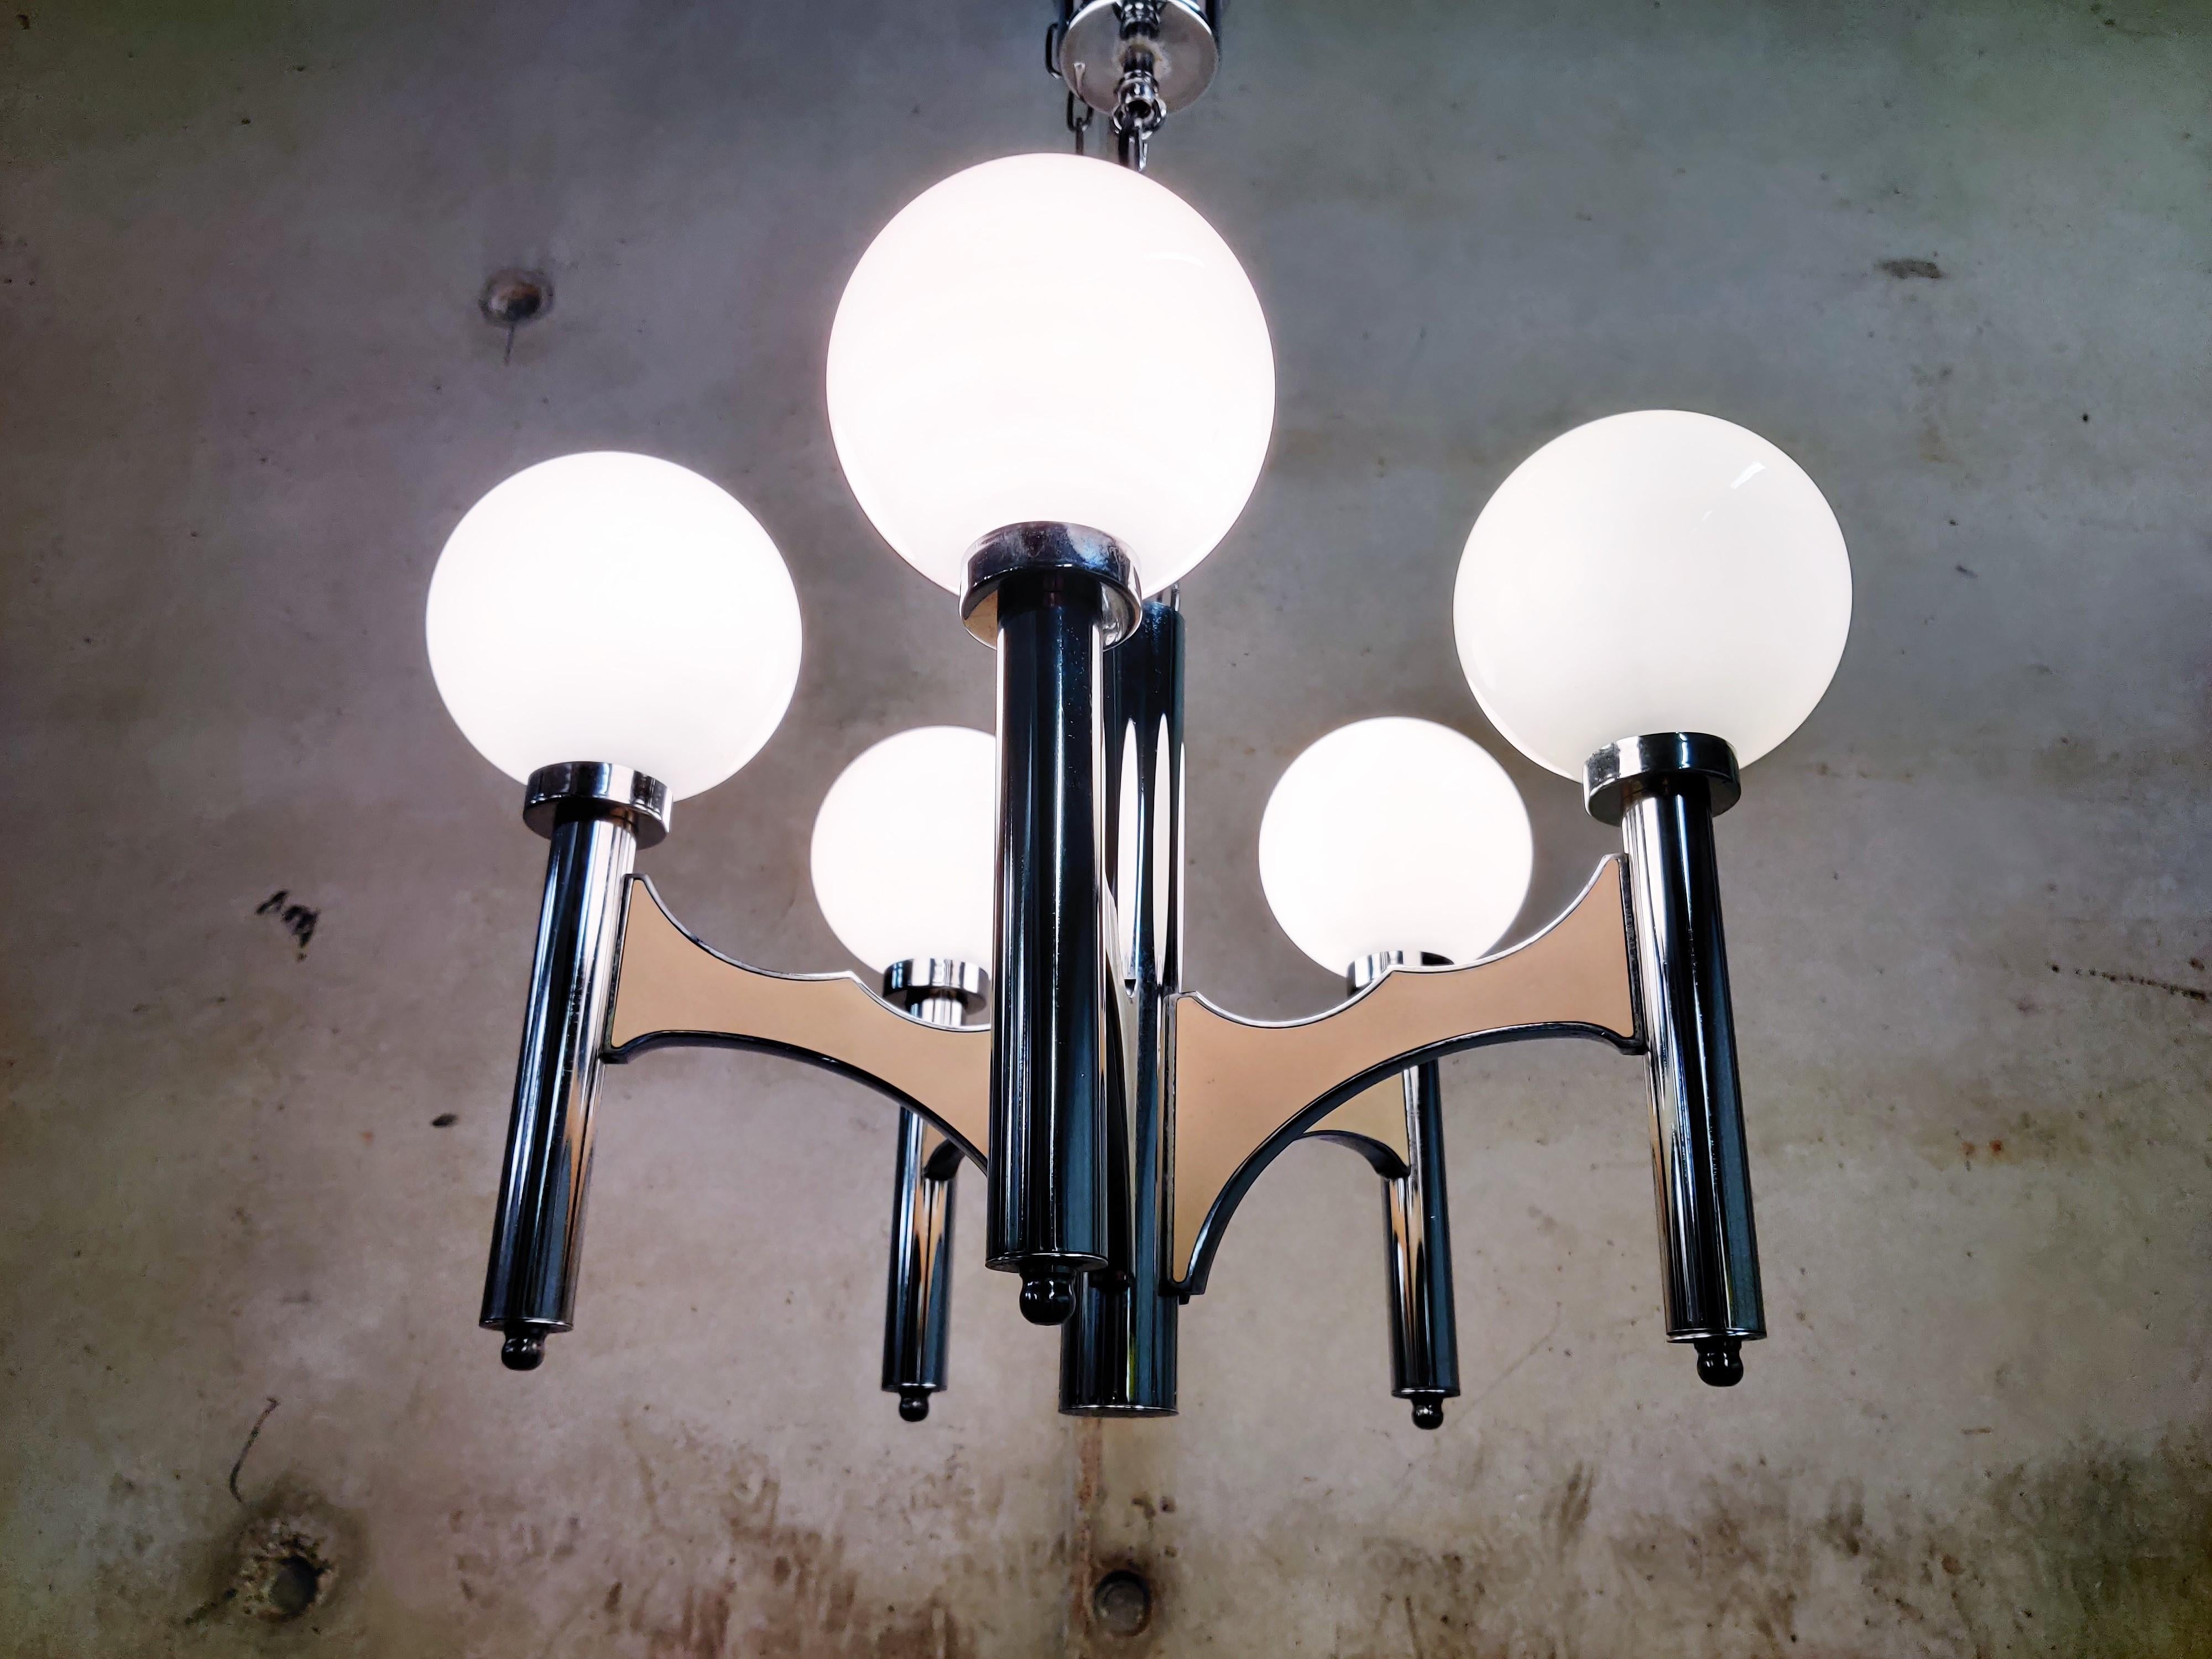 Chrome sciolari chandelier with beige lacquer and opaline glass globes.

This 5 lightpoint chandelier is in good condition and has been tested.

It can be used with regular E14 candle light bulbs.

1970s, Italy

Dimensions:
Height